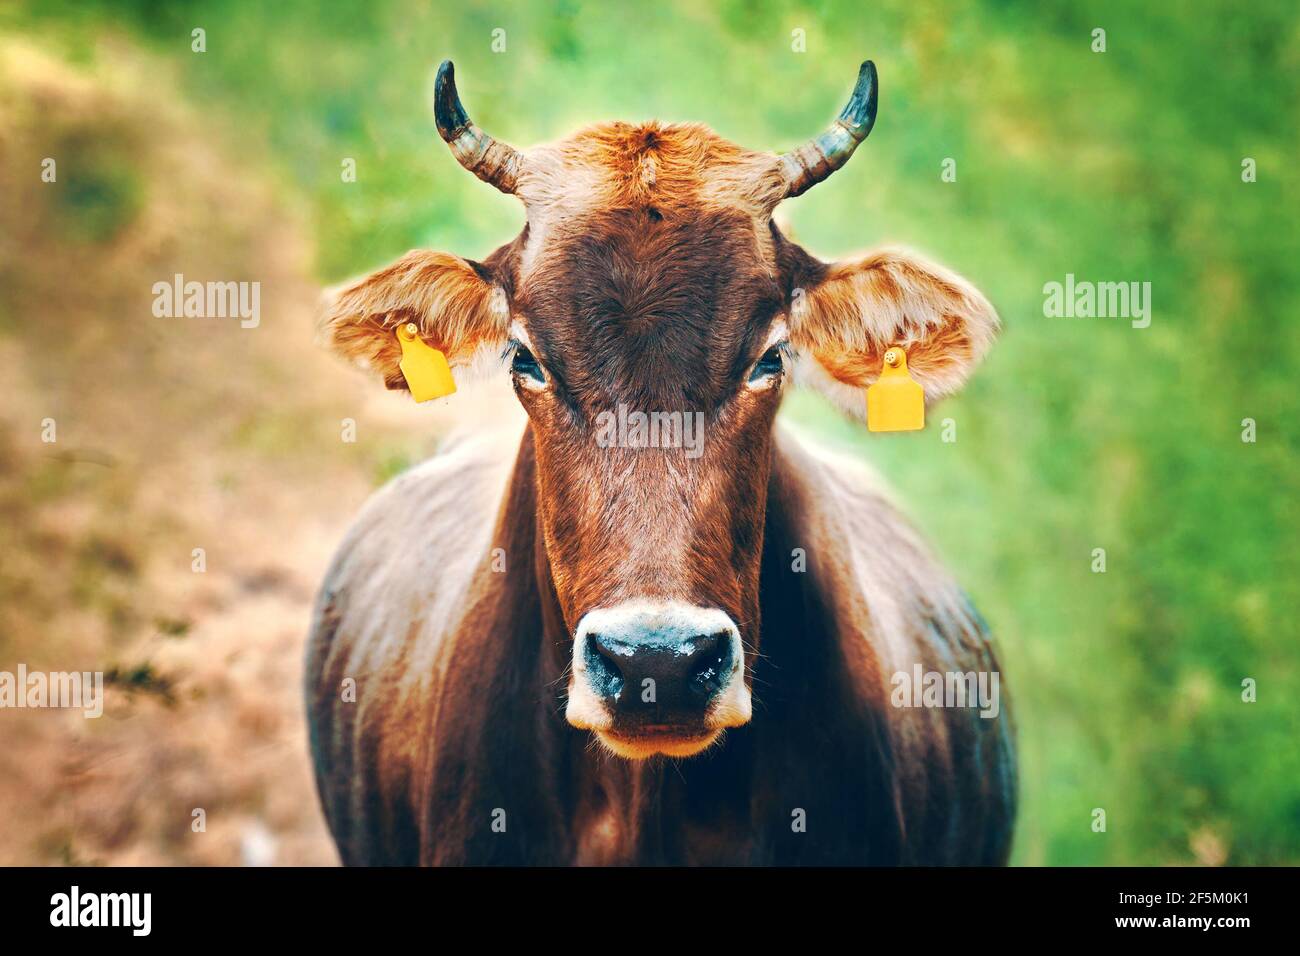 Cow with ear tags. Portrait of a bull looking right at you. Domestic farm animals. Brown cow with horns. Stock Photo